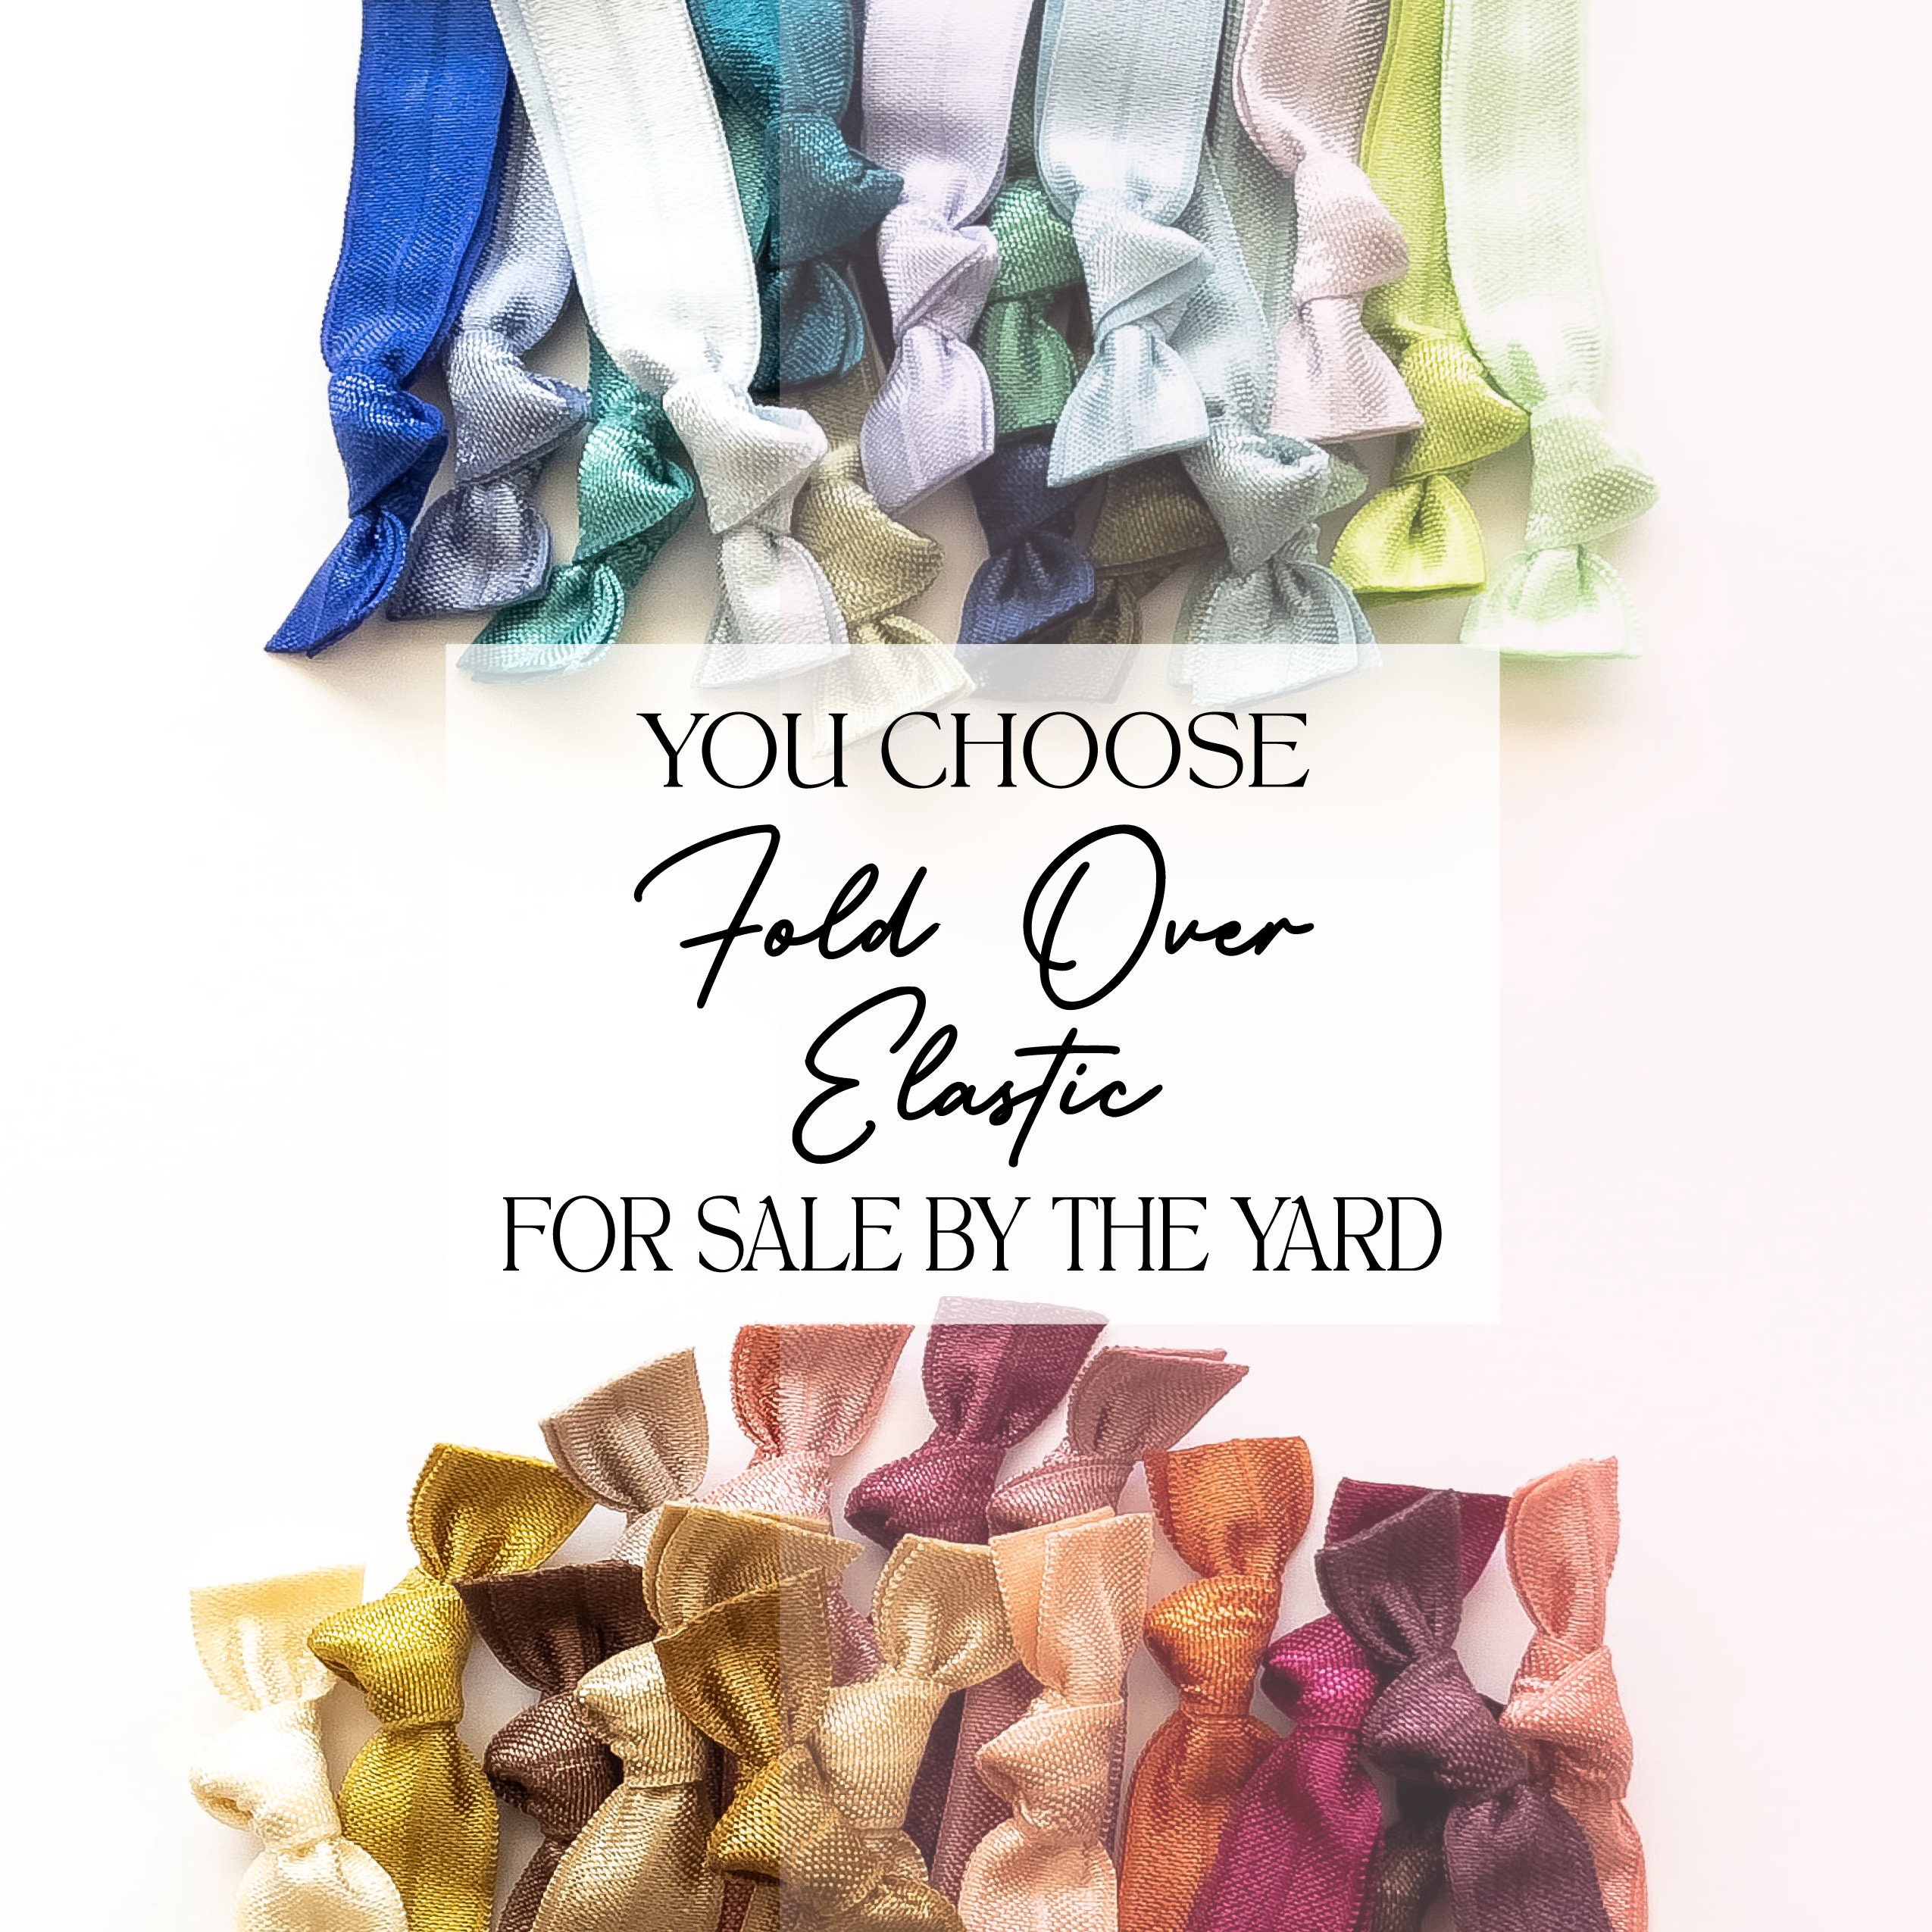 Fold Over Elastic 1, Fold Over Elastic for Headbands, 1 inch Foldover  Elastic by the single yard, 5 or 10 yards, 27 Colors to Choose From